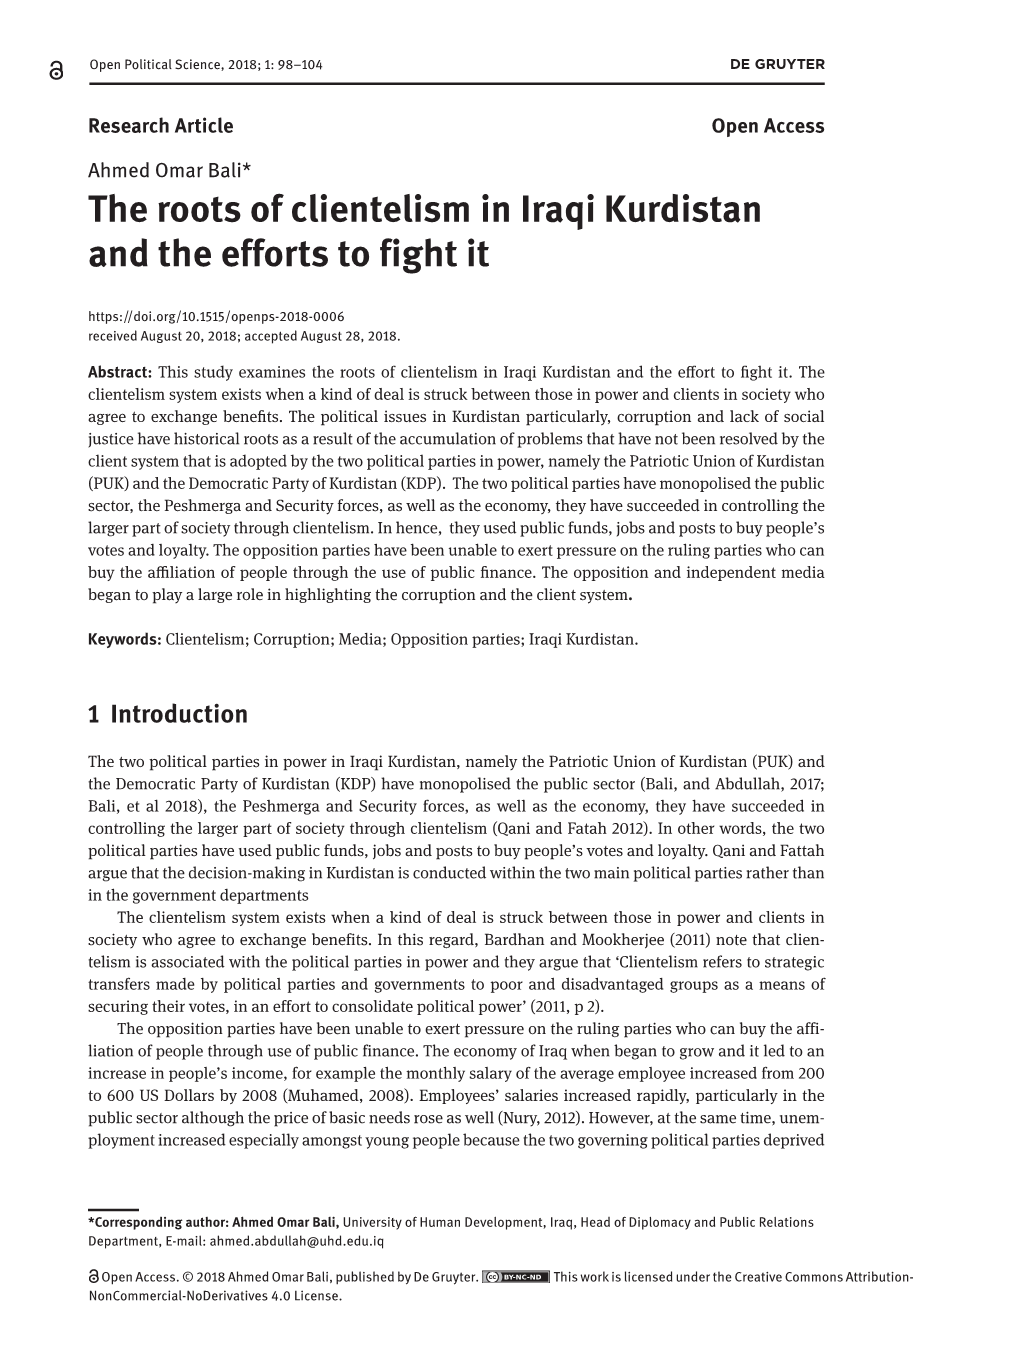 The Roots of Clientelism in Iraqi Kurdistan and the Efforts to Fight It 99